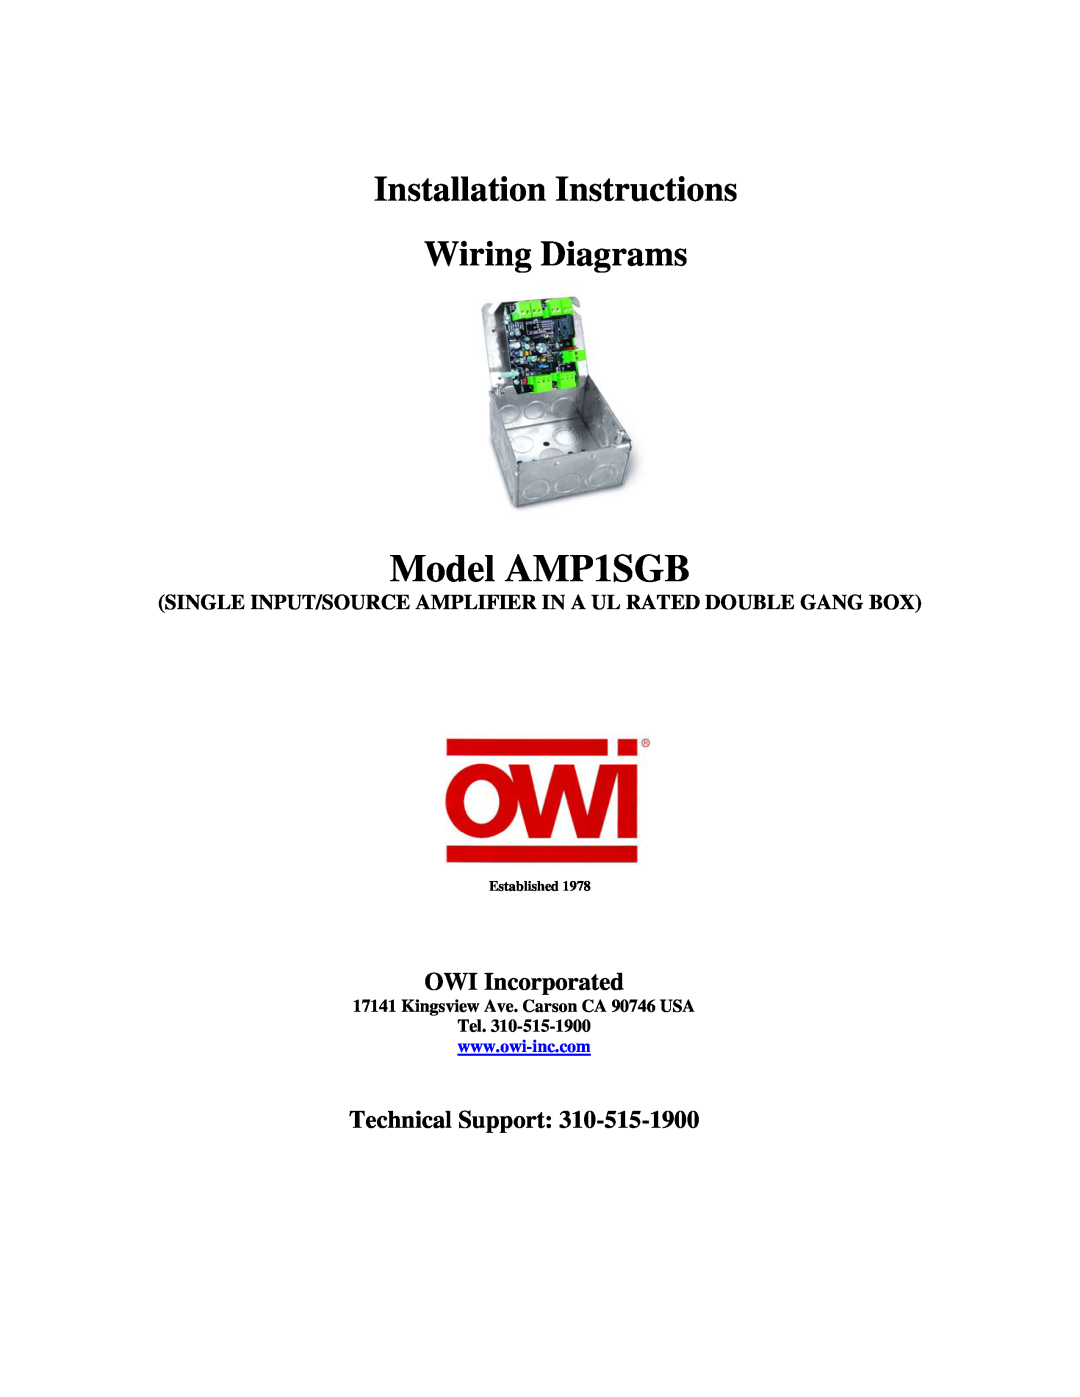 OWI installation instructions OWI Incorporated, Technical Support, Model AMP1SGB, Kingsview Ave. Carson CA 90746 USA 